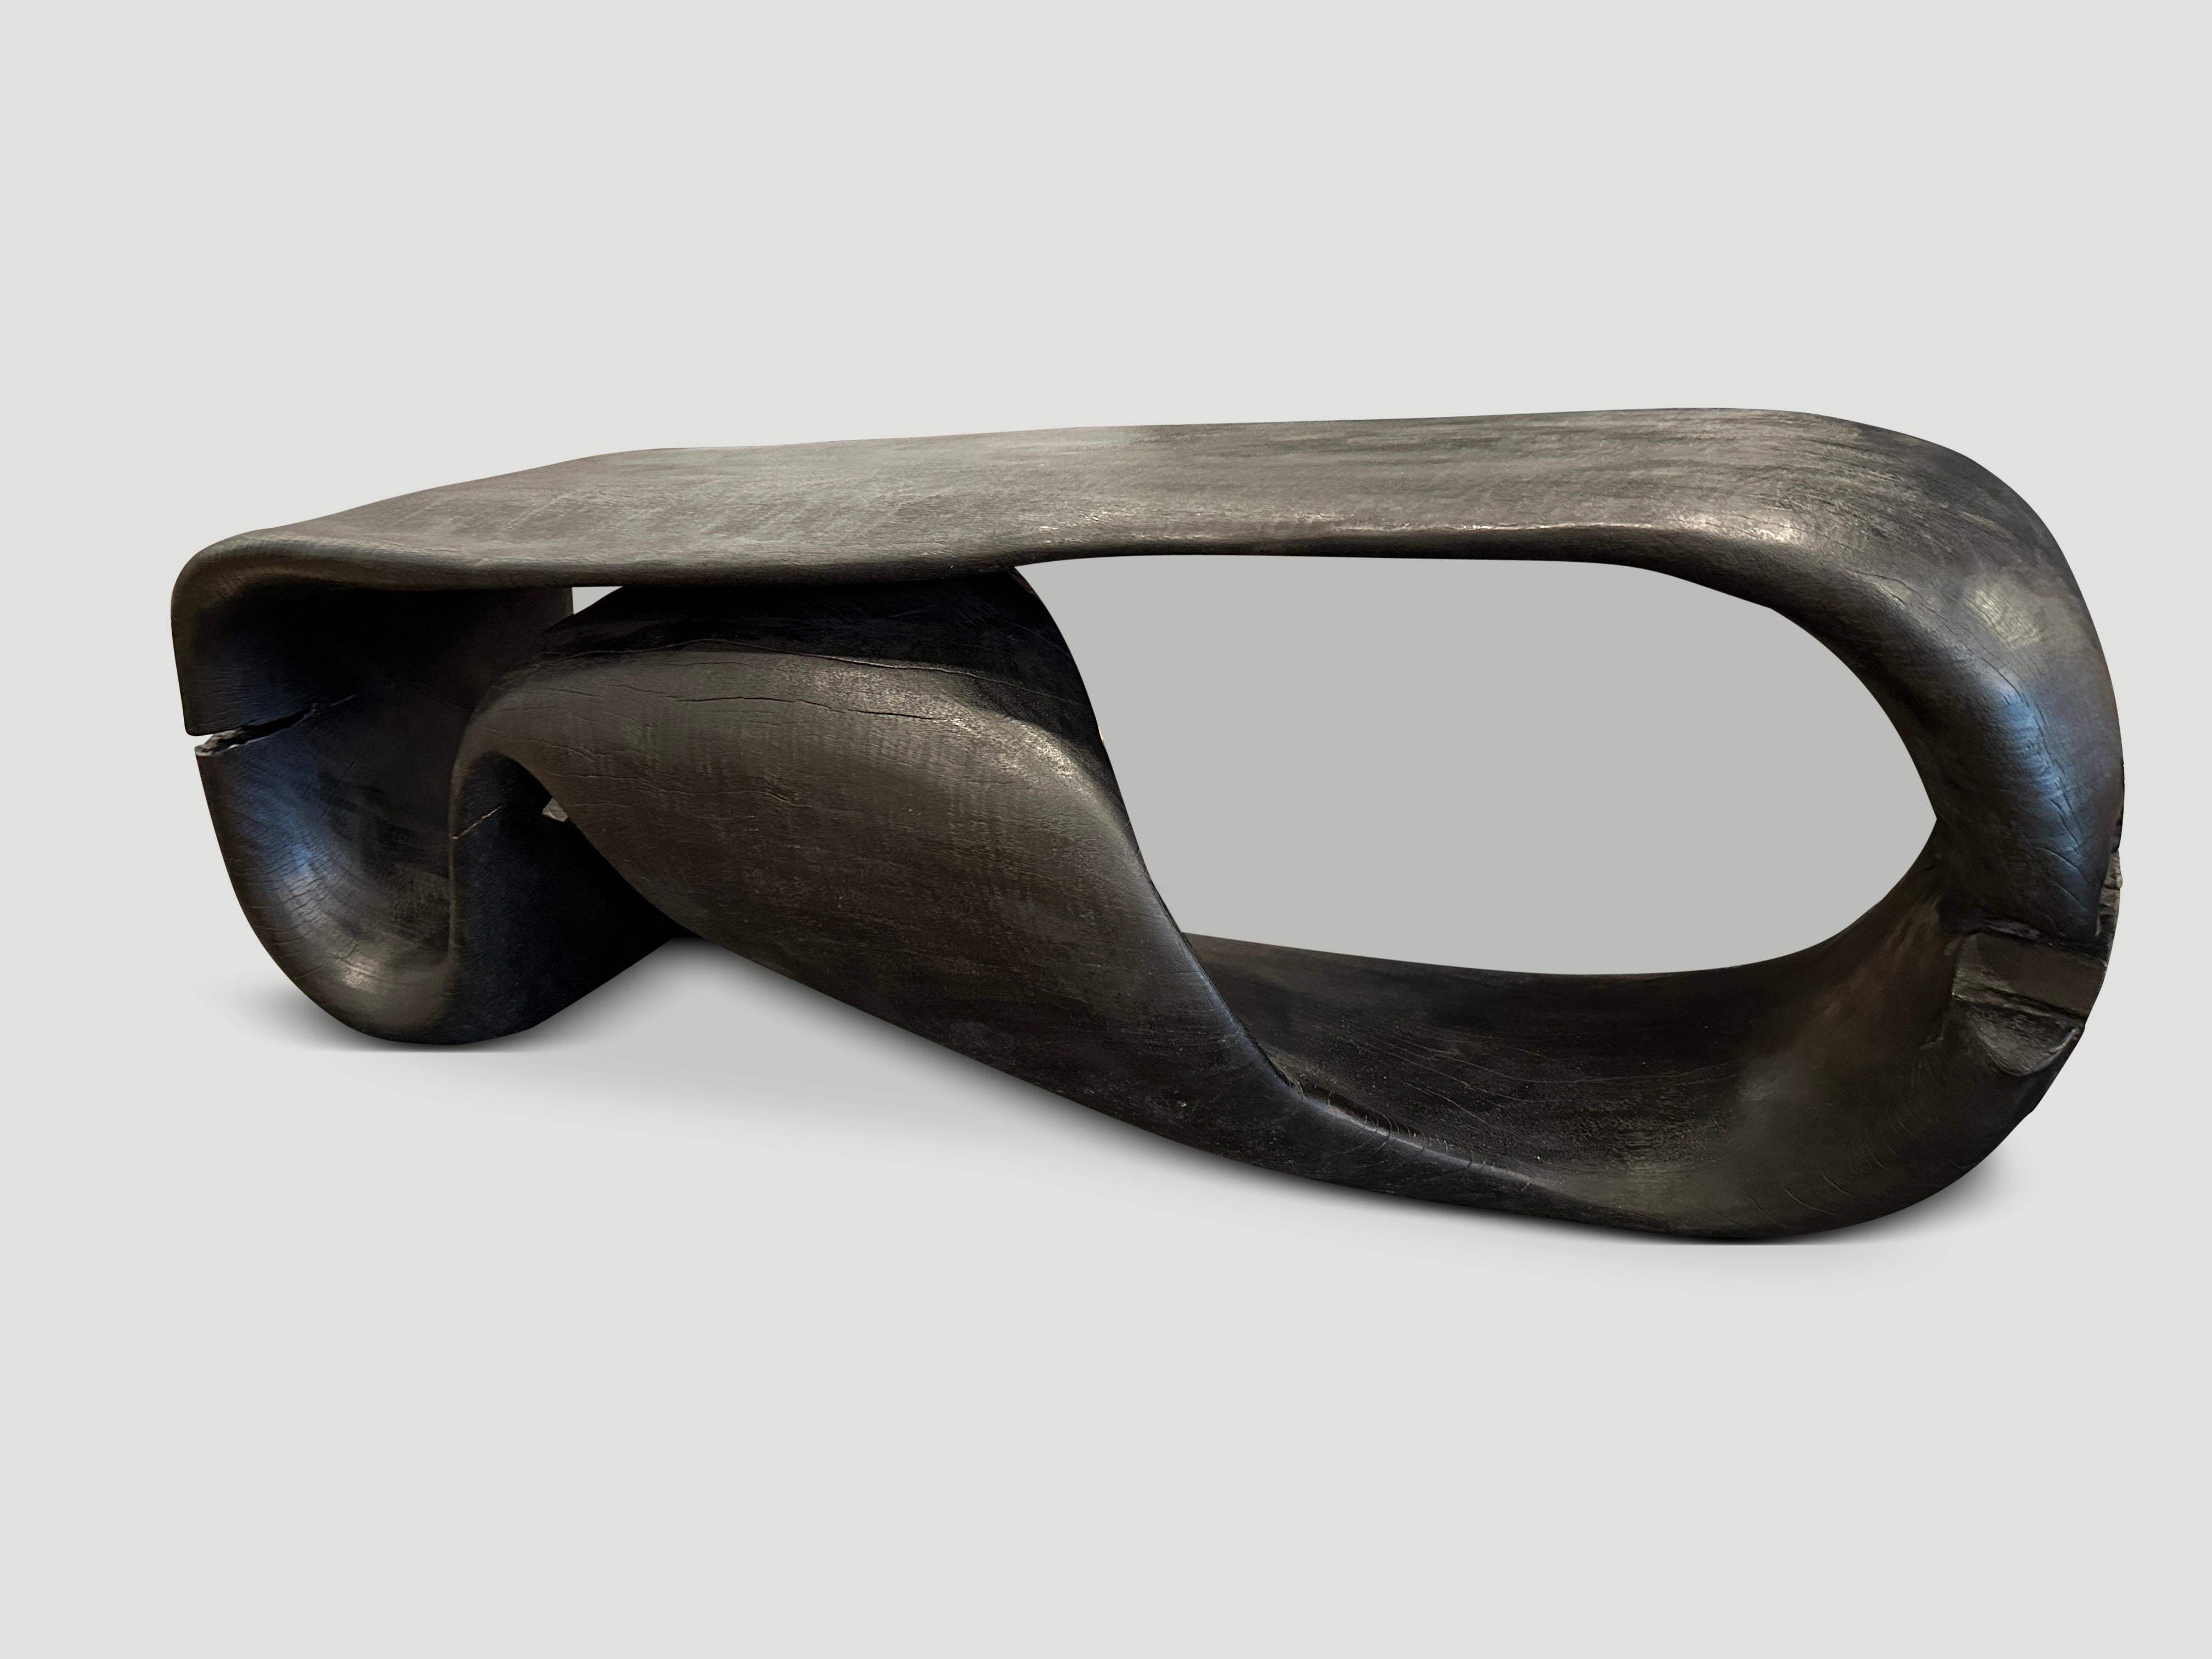 Beautiful one of a kind rare coffee table made from a single piece of suar wood. This seamless coffee table is both sculptural and usable. We lightly charred it revealing the beautiful wood grain. It’s all in the details.

The Triple Burnt